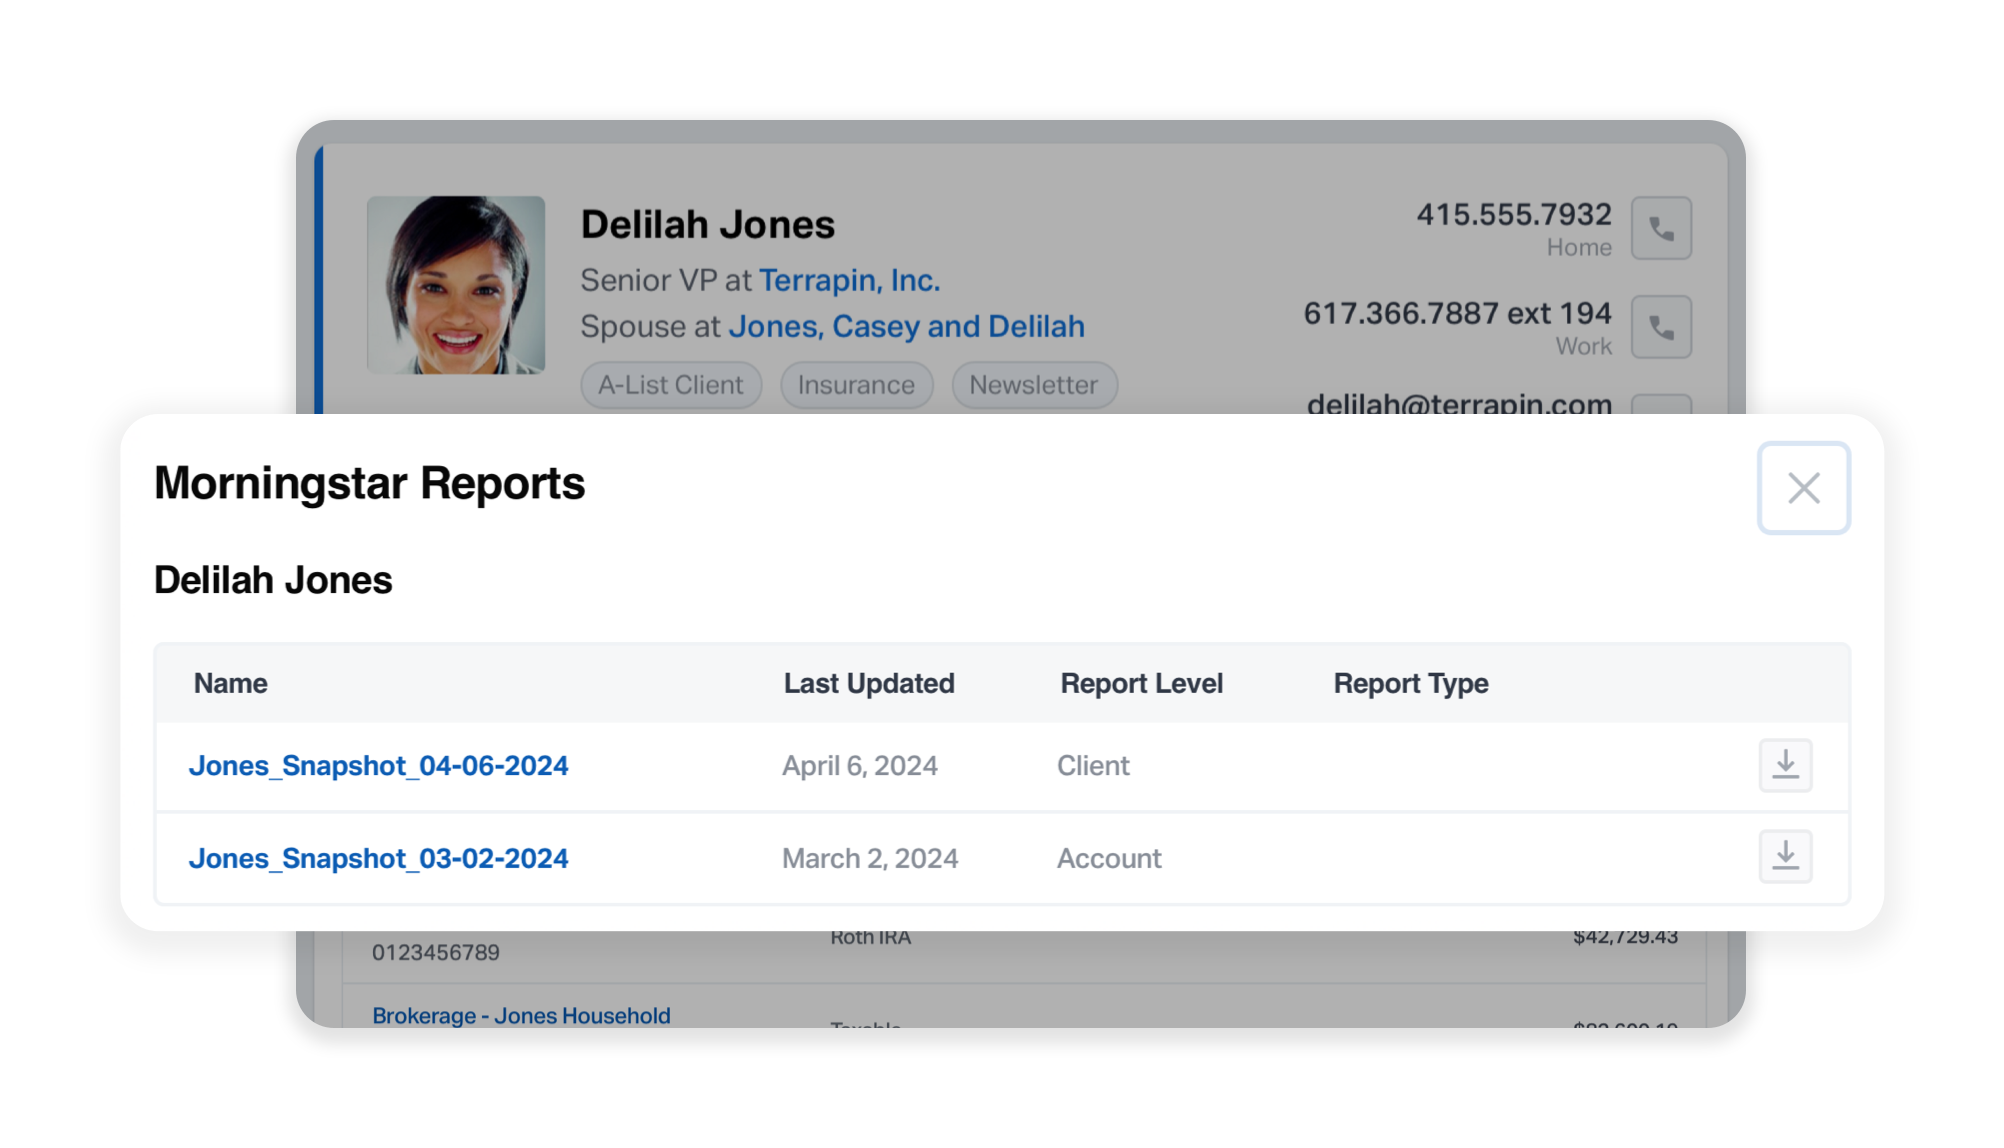 Easily access and manage Morningstar Office reports directly within Wealthbox by clicking on the "View Reports" button.